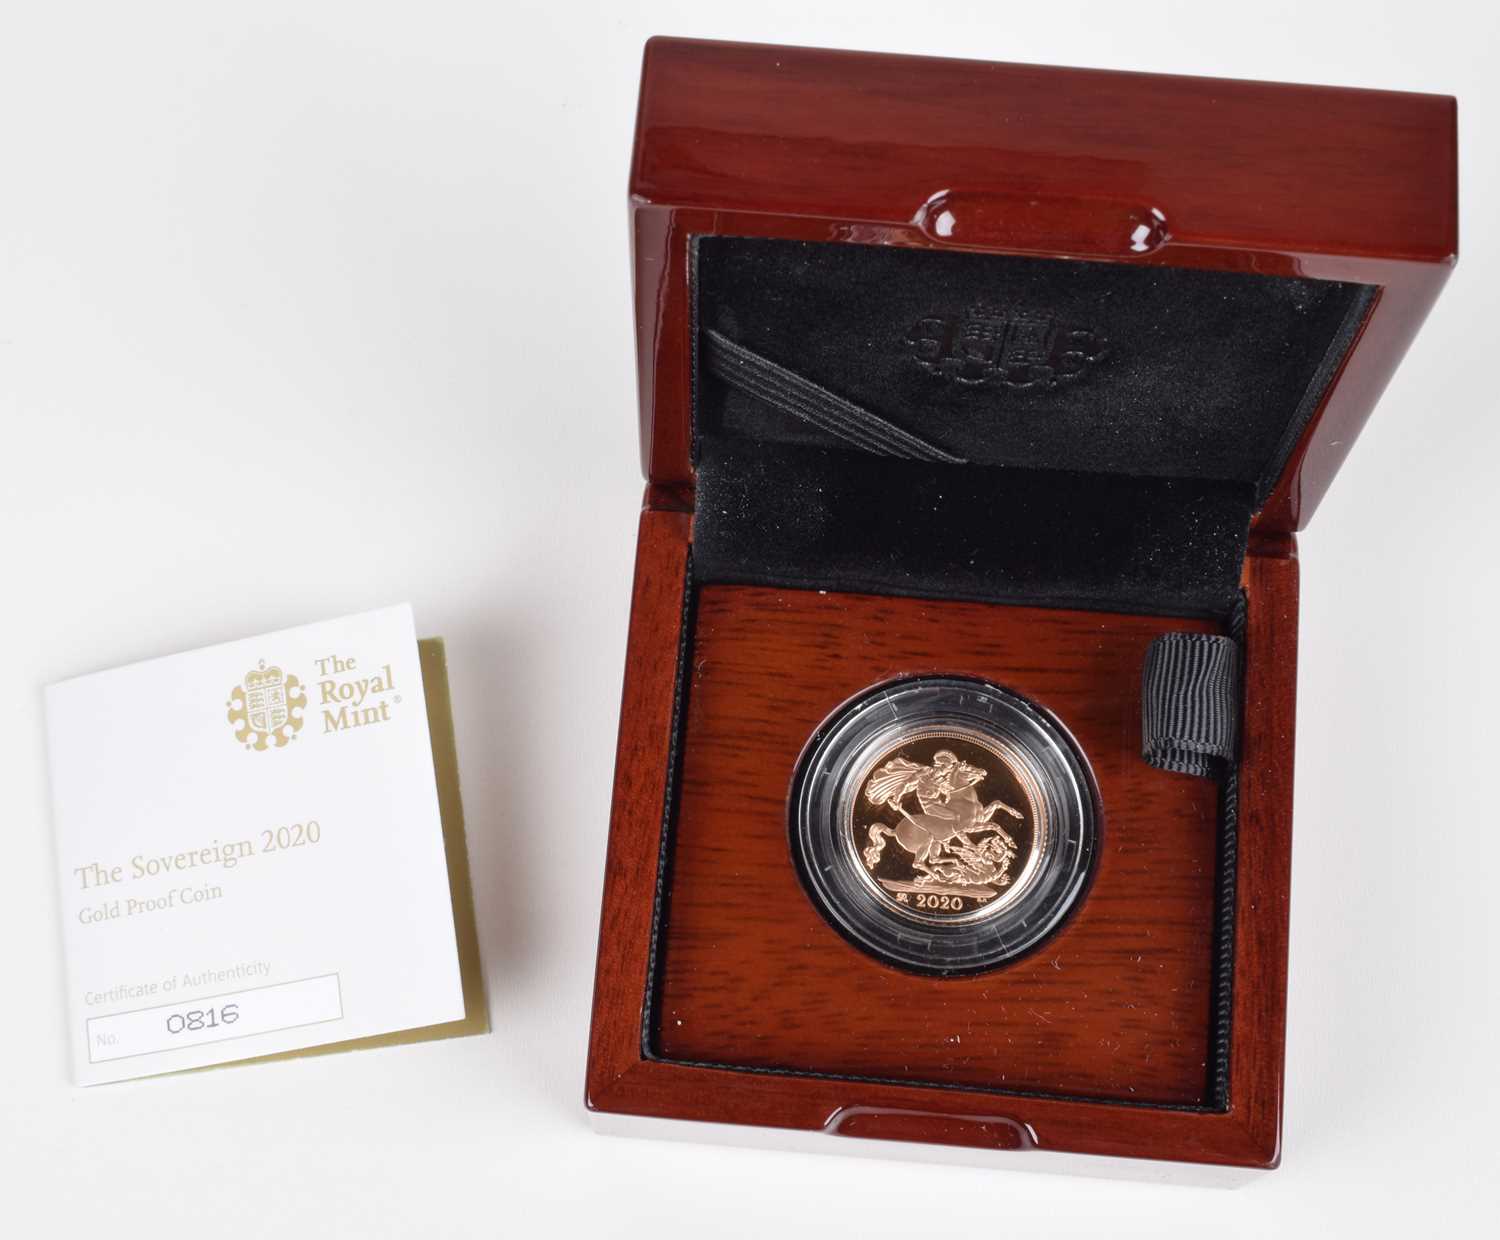 Lot Elizabeth II, Gold Proof Sovereign, 2020, with George III Royal Cypher on reverse.